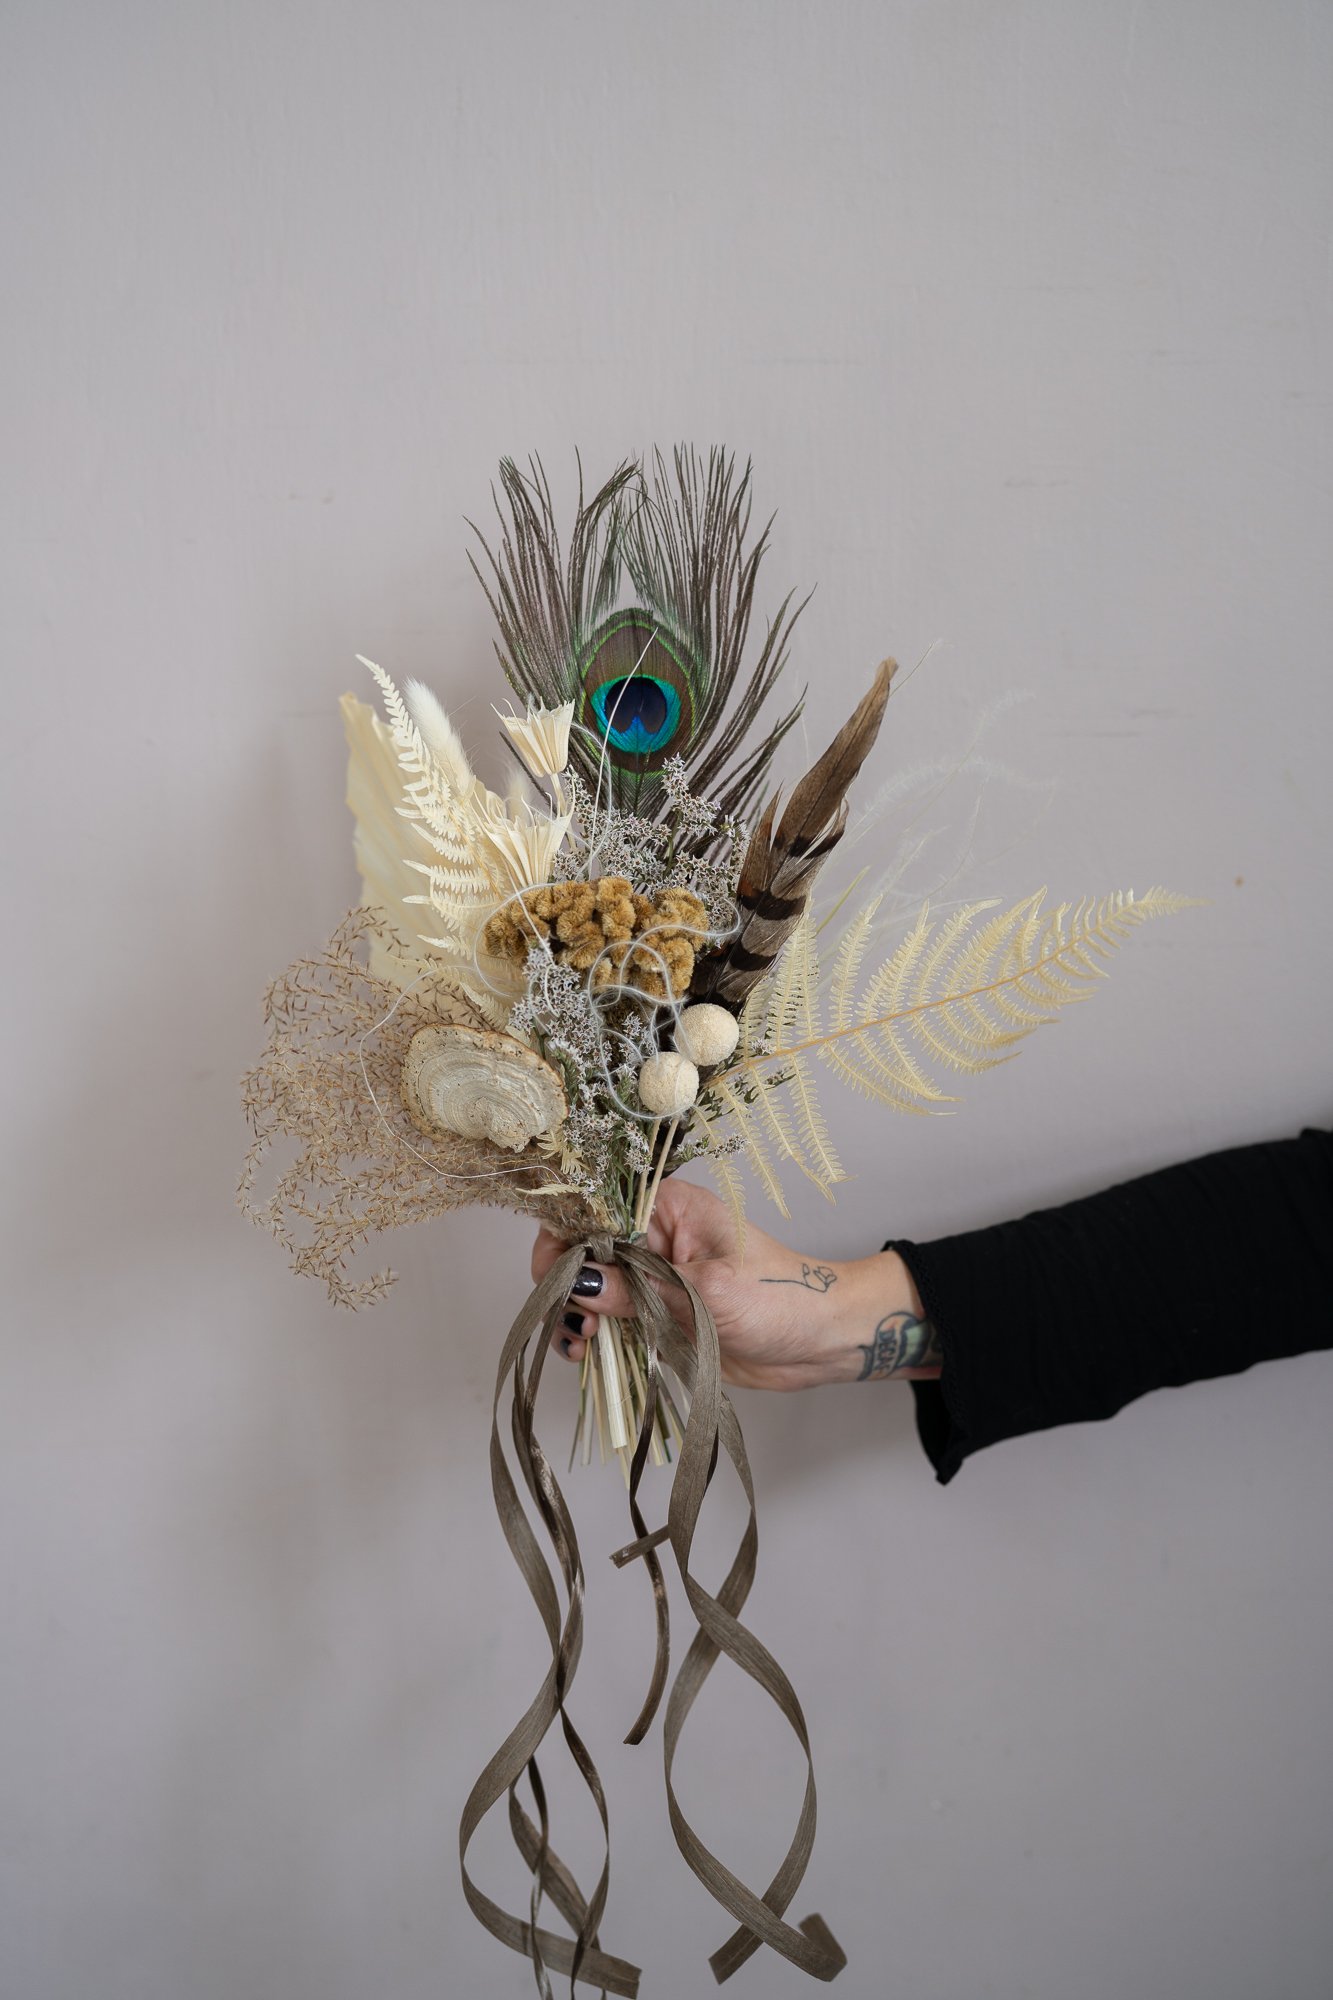 An image of a preserved flower bouquet.